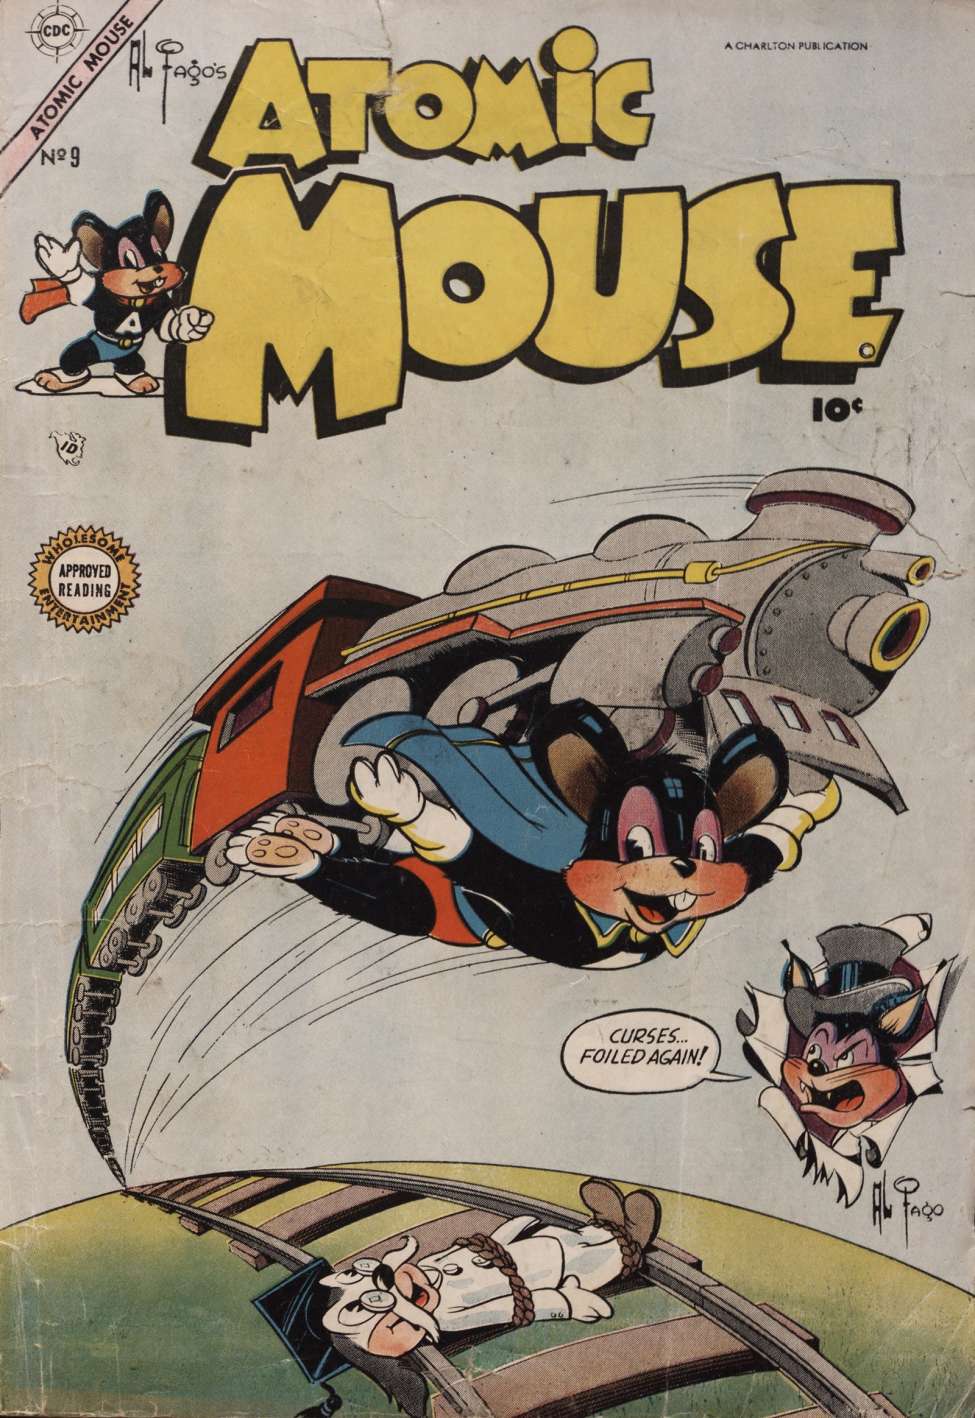 Book Cover For Atomic Mouse 9 - Version 2